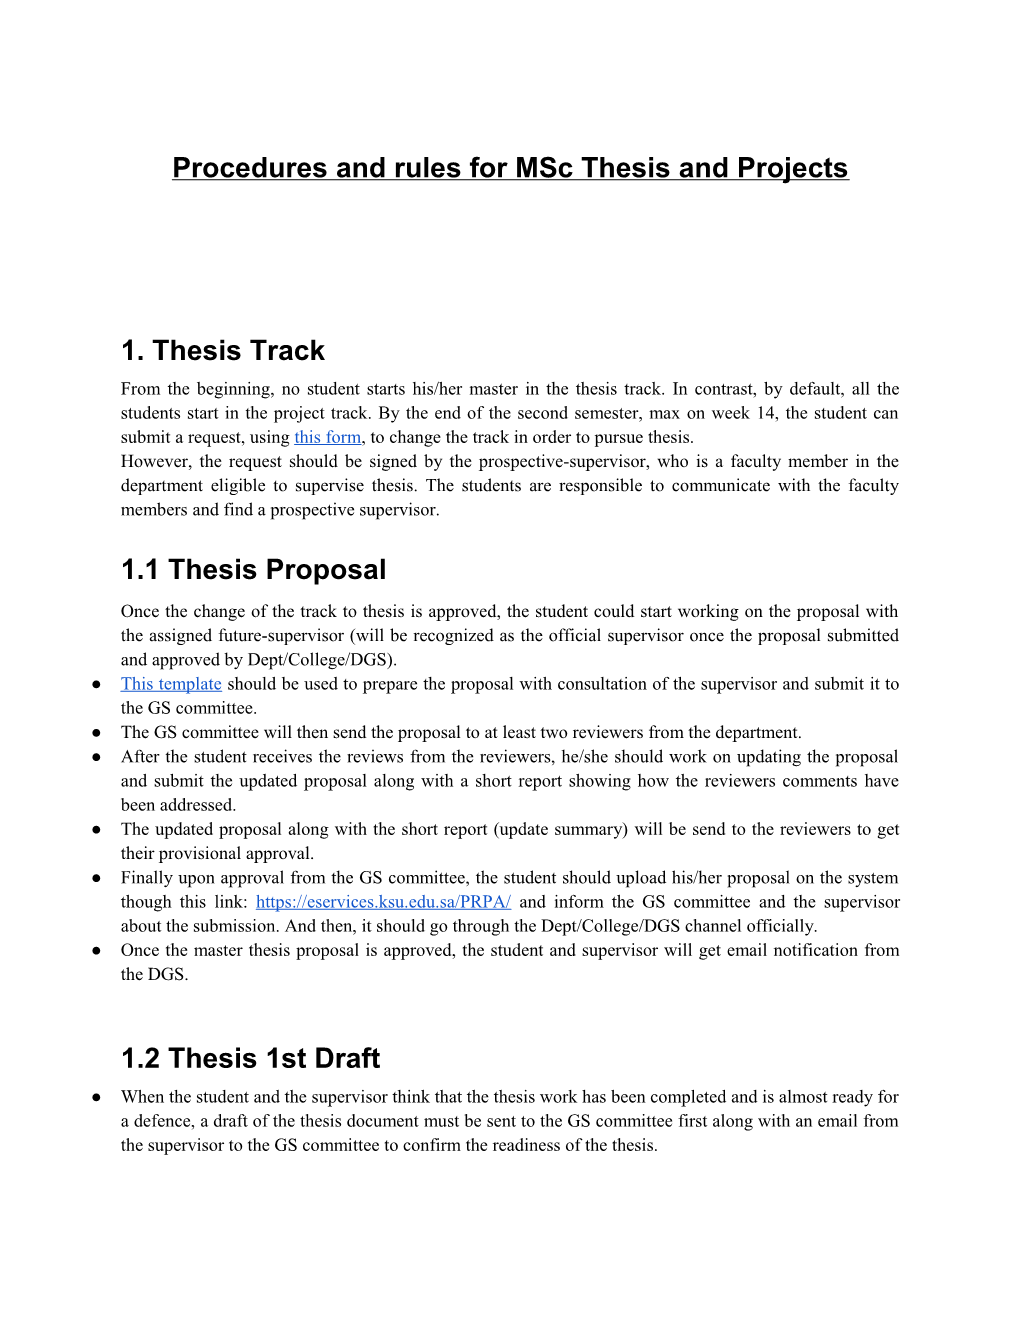 Procedures and Rules for Msc Thesis and Projects